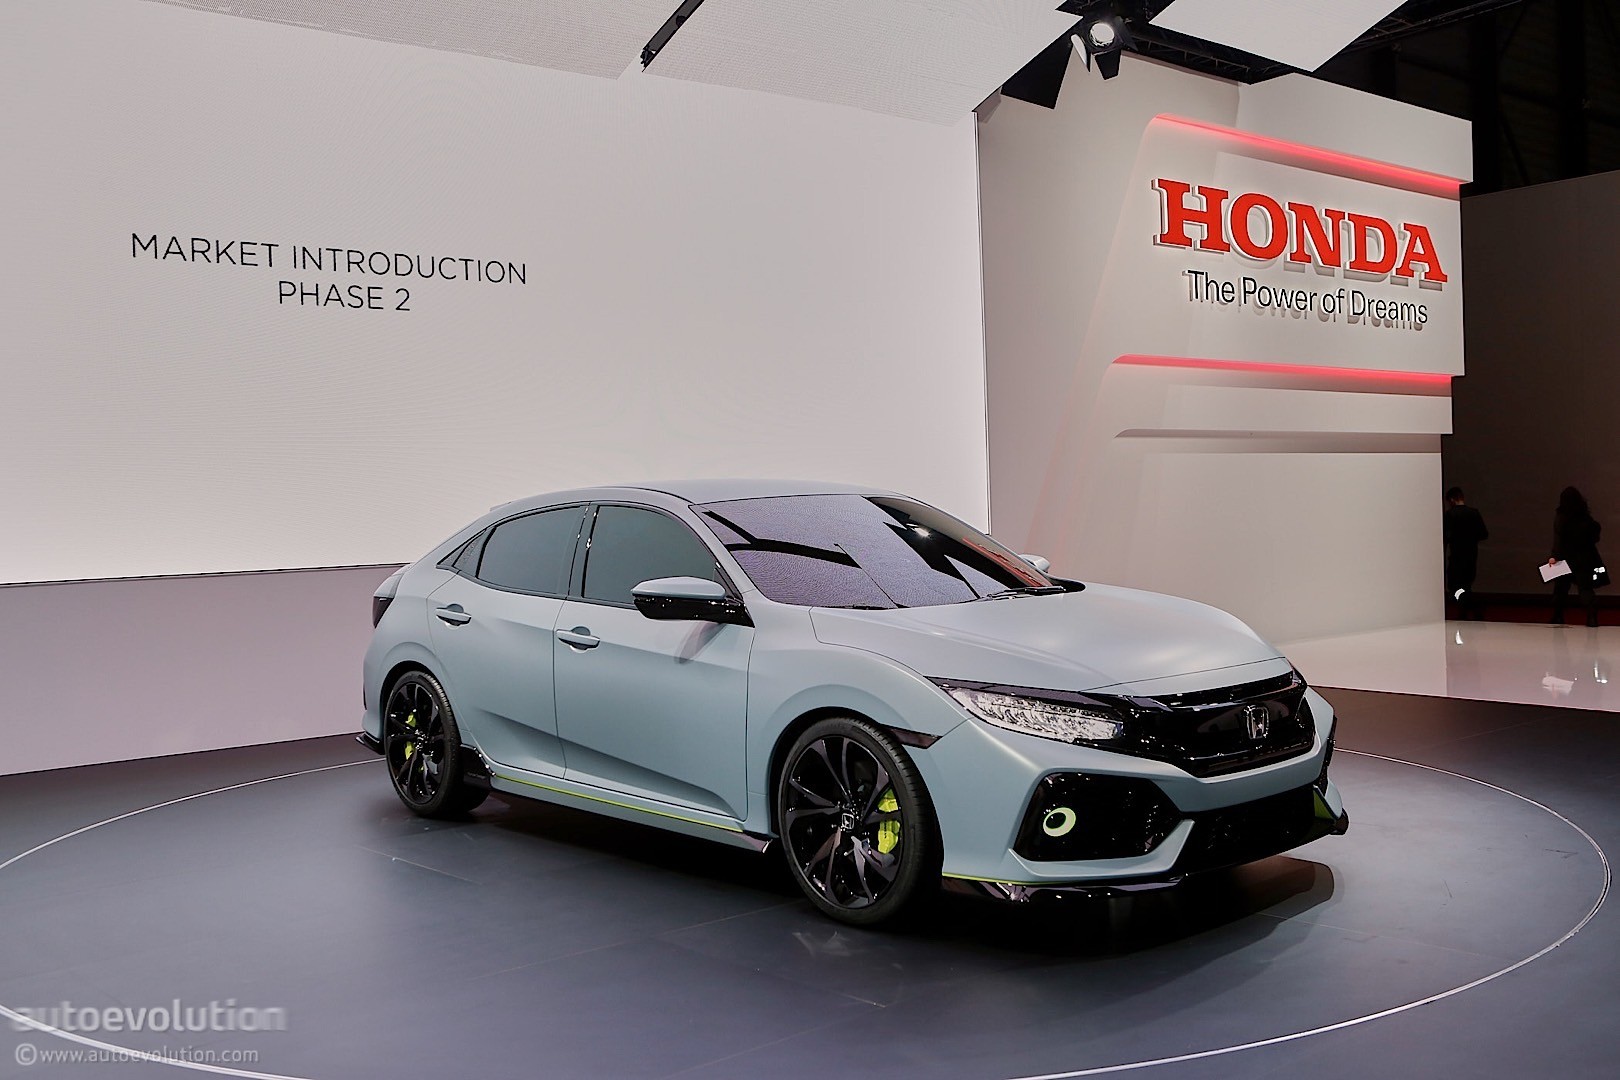 honda-civic-hatchback-coming-to-new-york-civic-si-and-new-type-r-in-2017_21.jpg